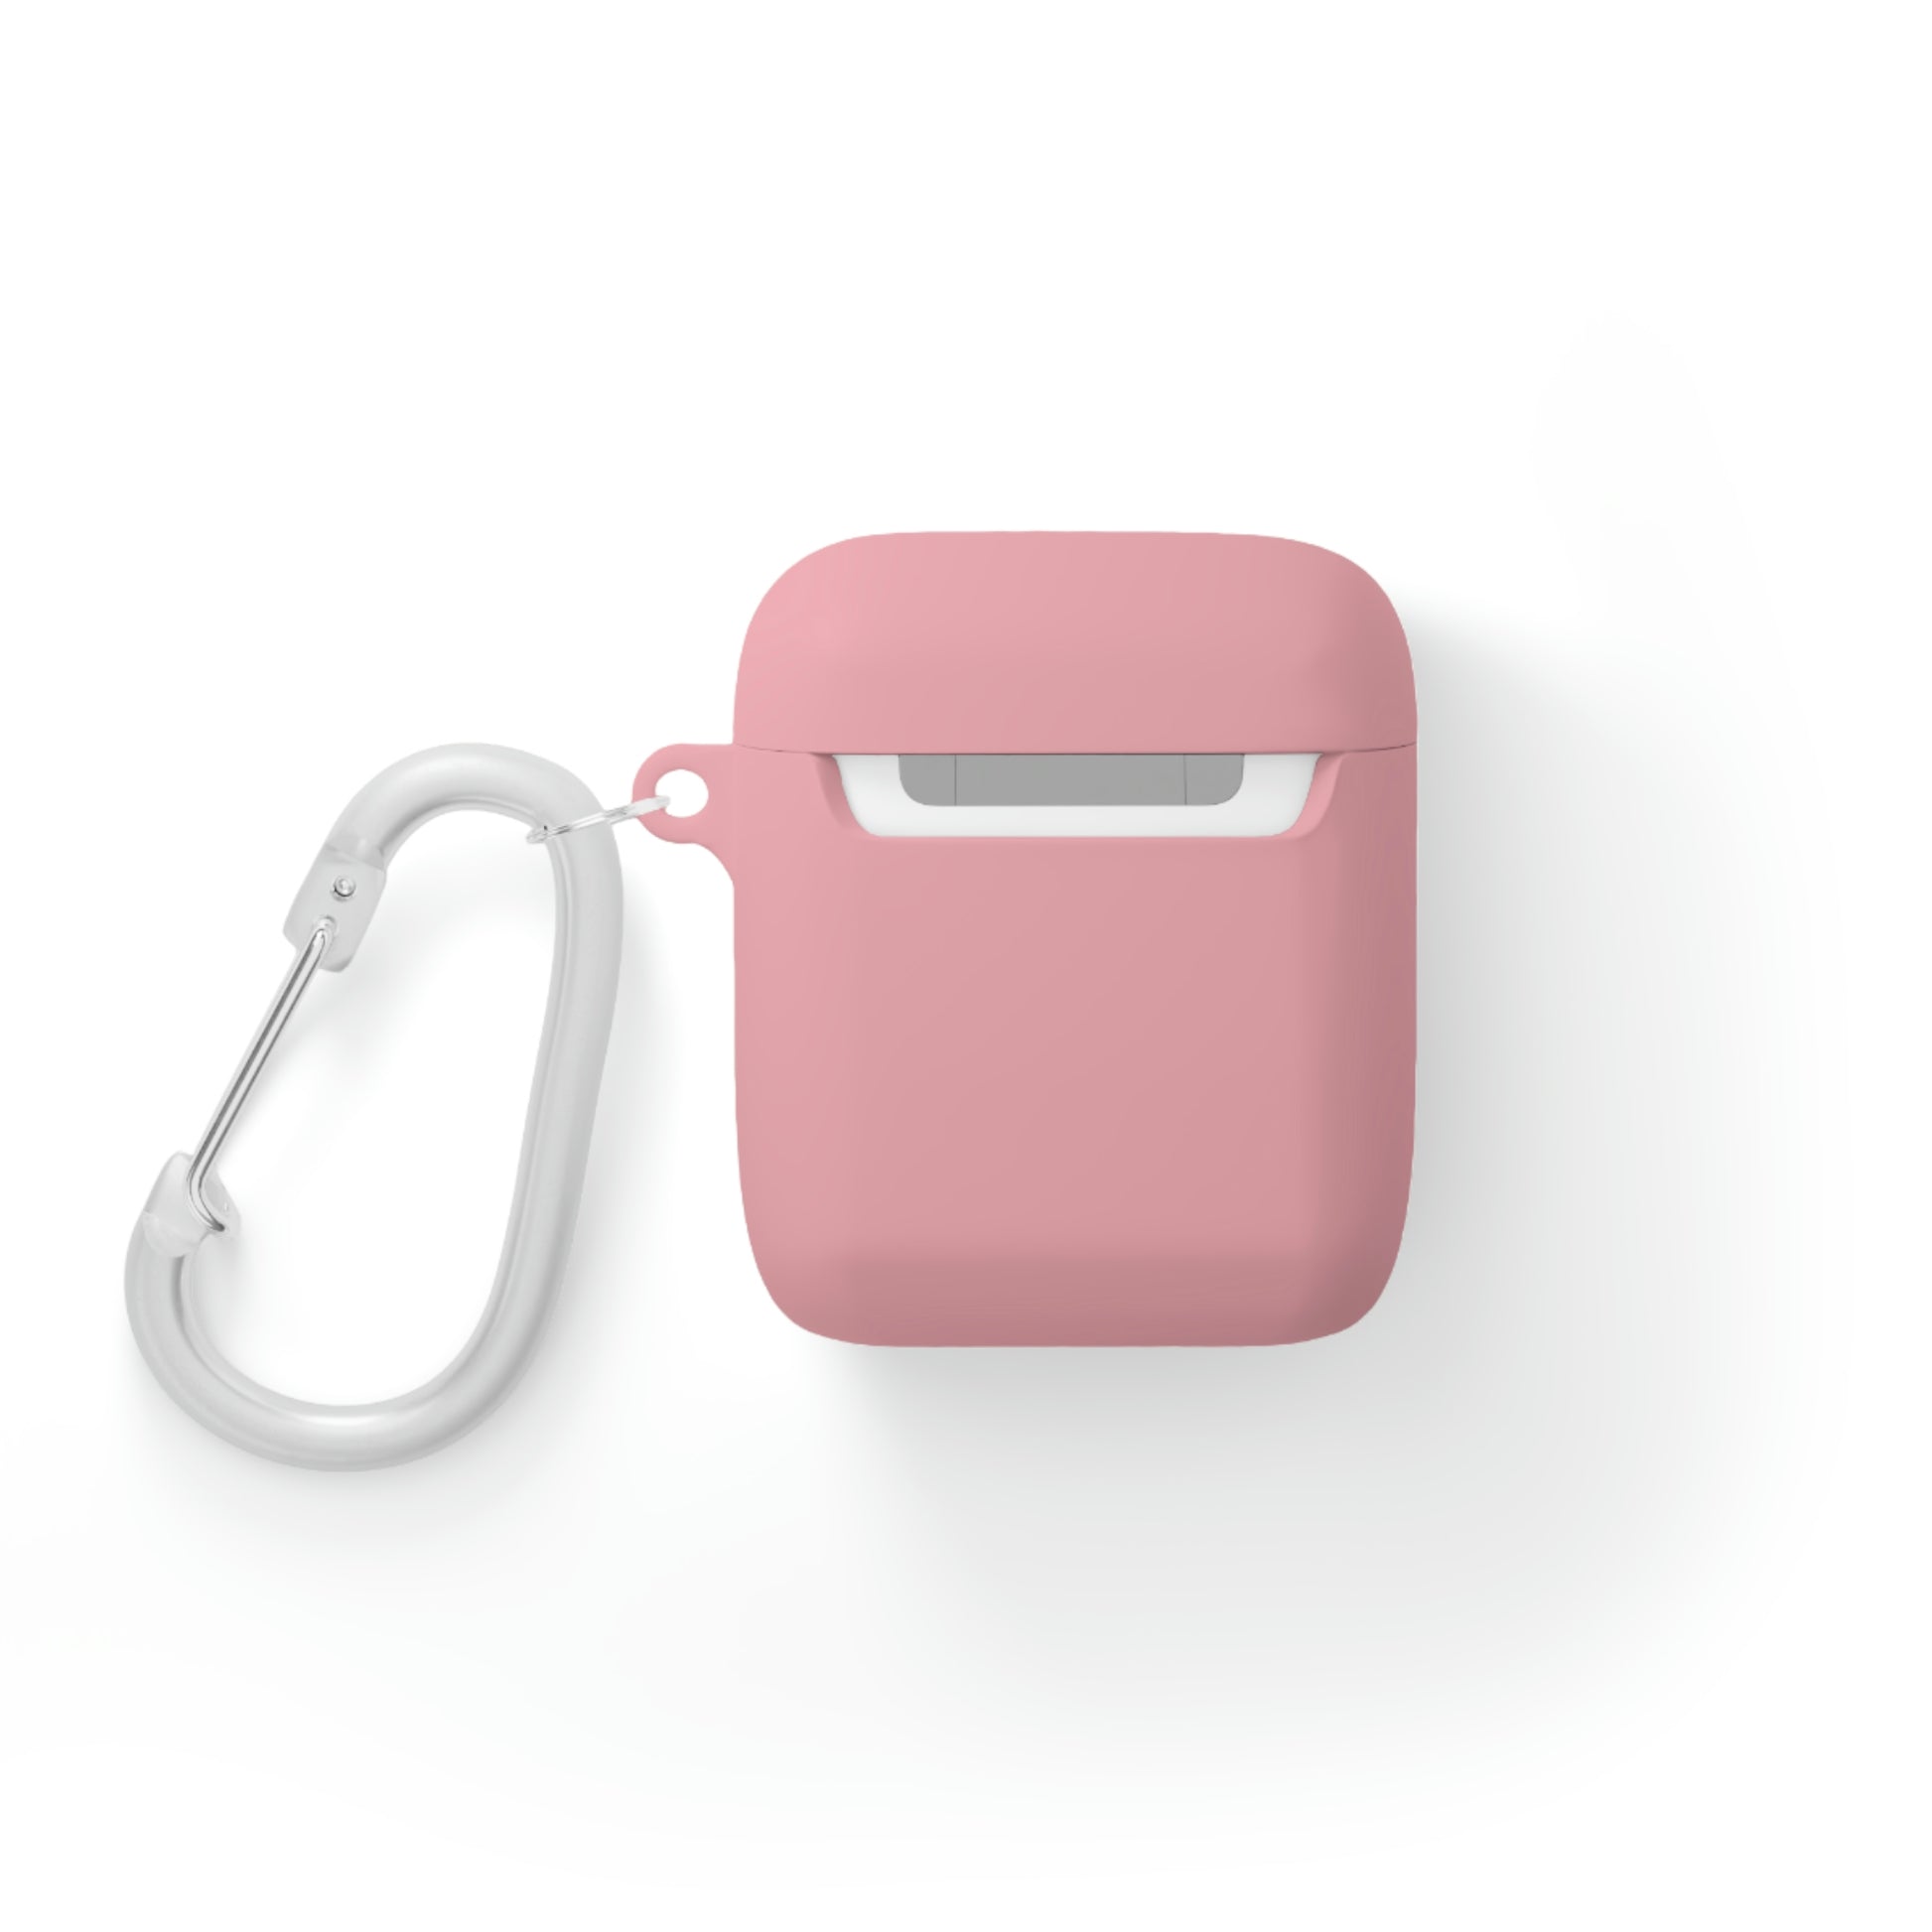 AirPods and AirPods Pro Case Cover - Simple Designs